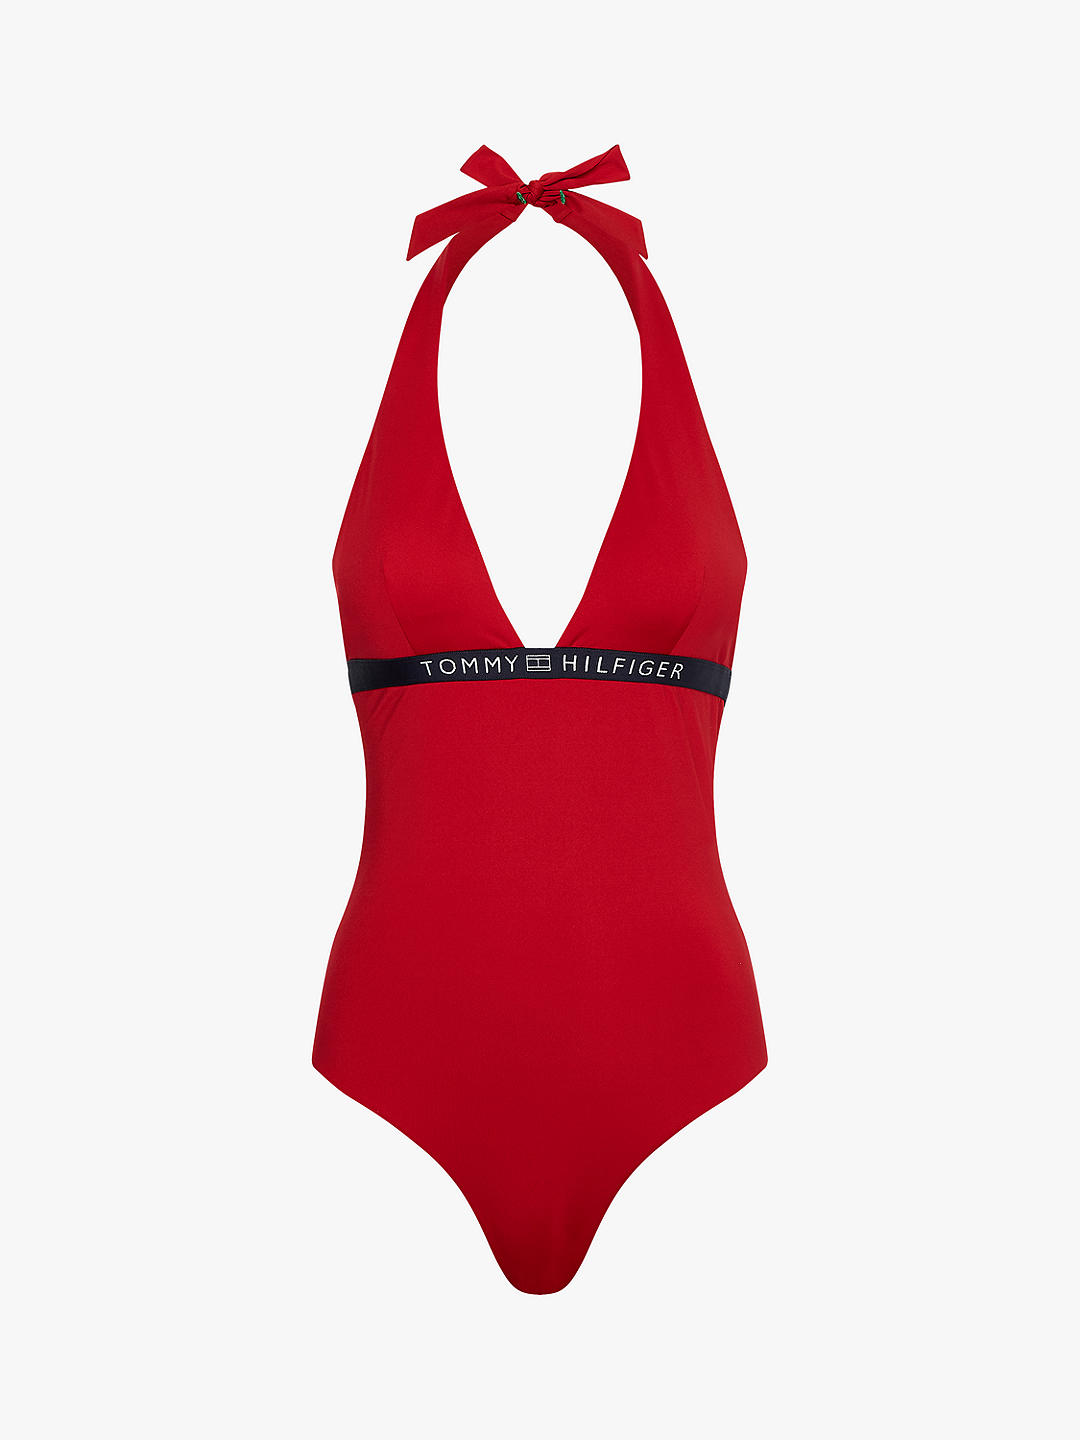 Tommy Hilfiger Halter Swimsuit, Primary Red